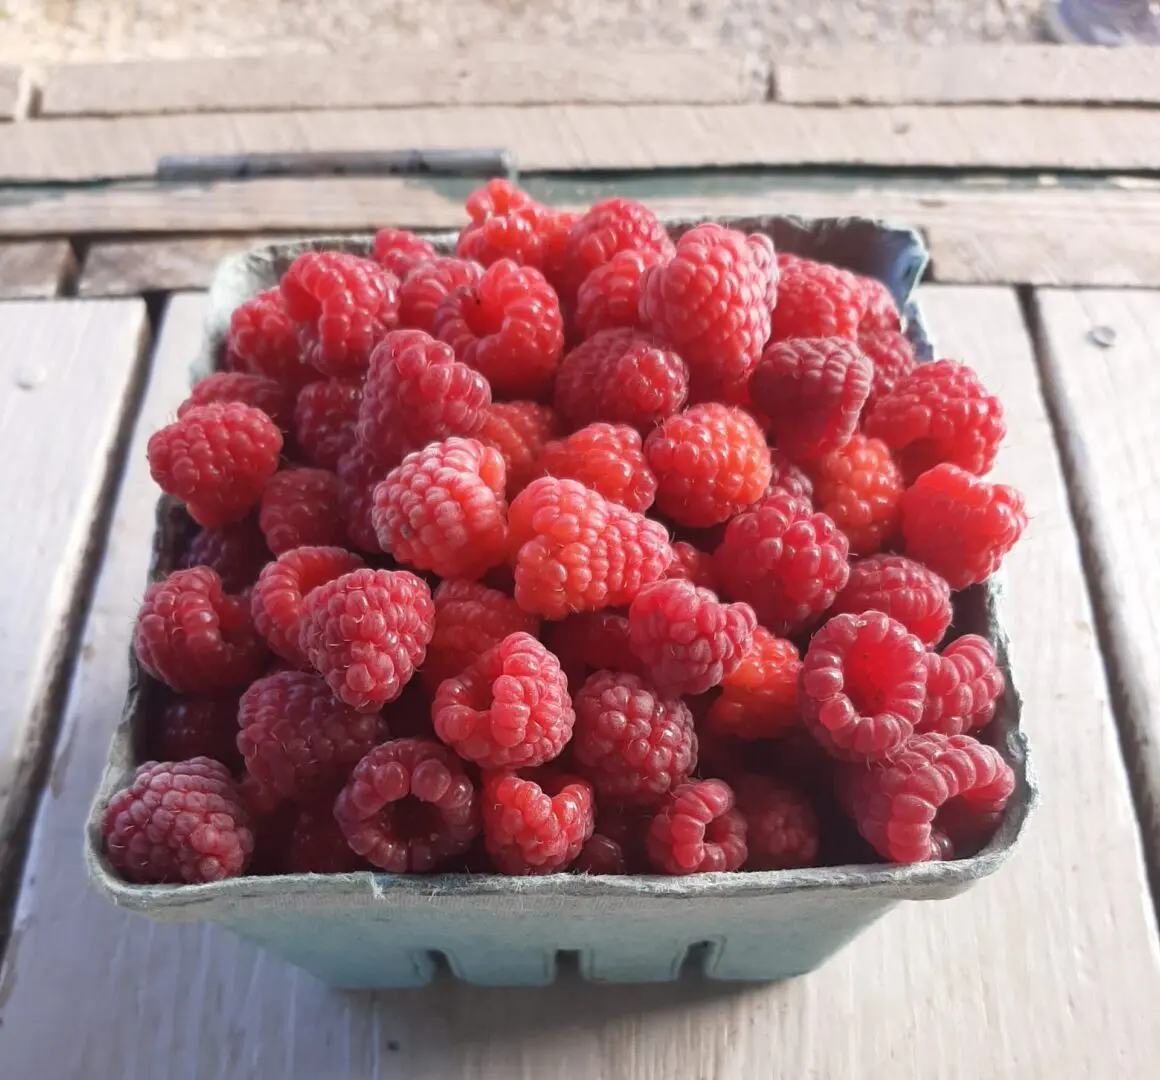 A small container filled with berries